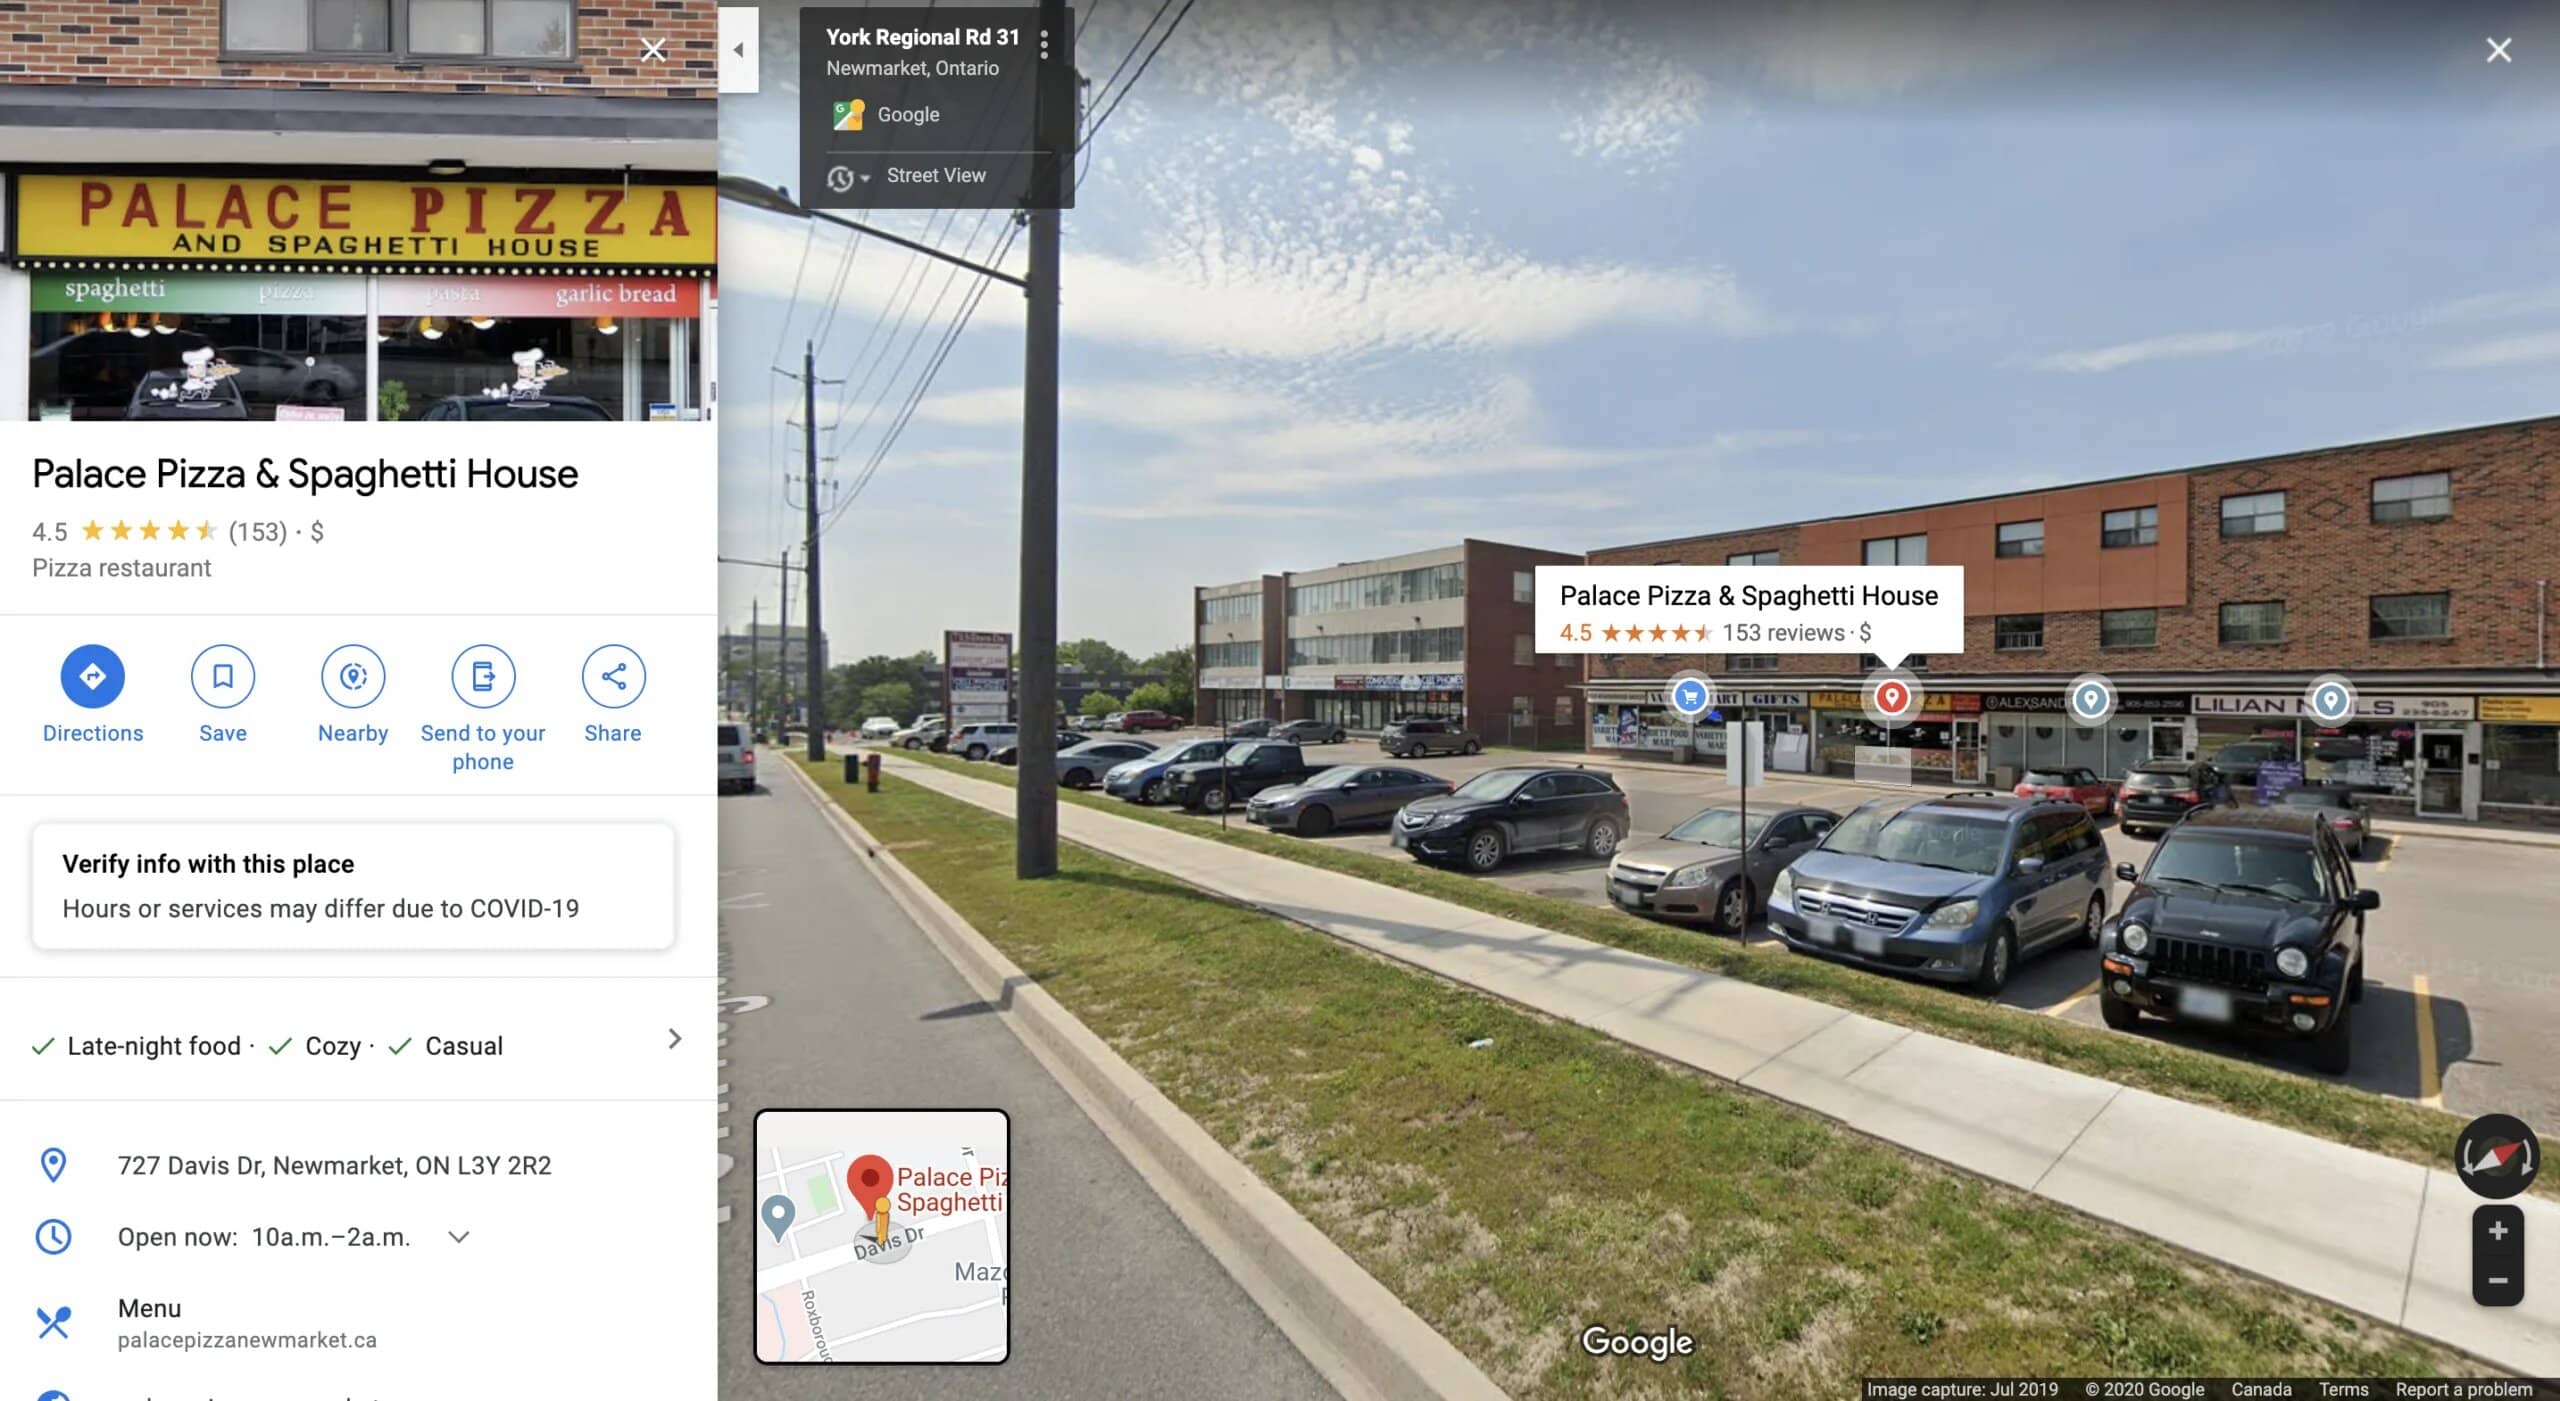 Google Maps Lables for Palace Pizza Spaghetti House